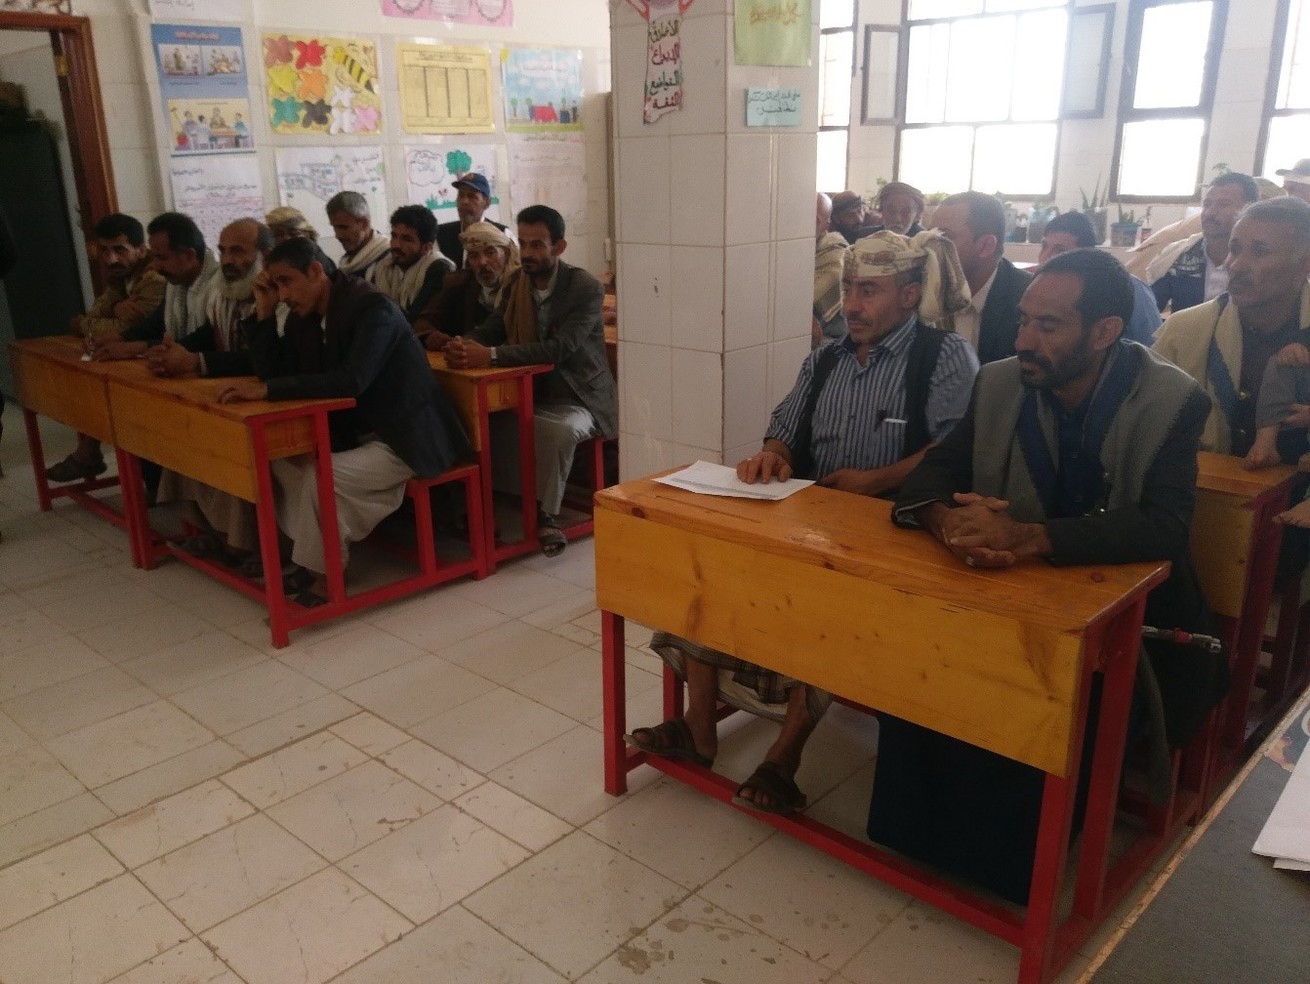 Stakeholders discuss educational change during a dialogue session at Al-Hareth school